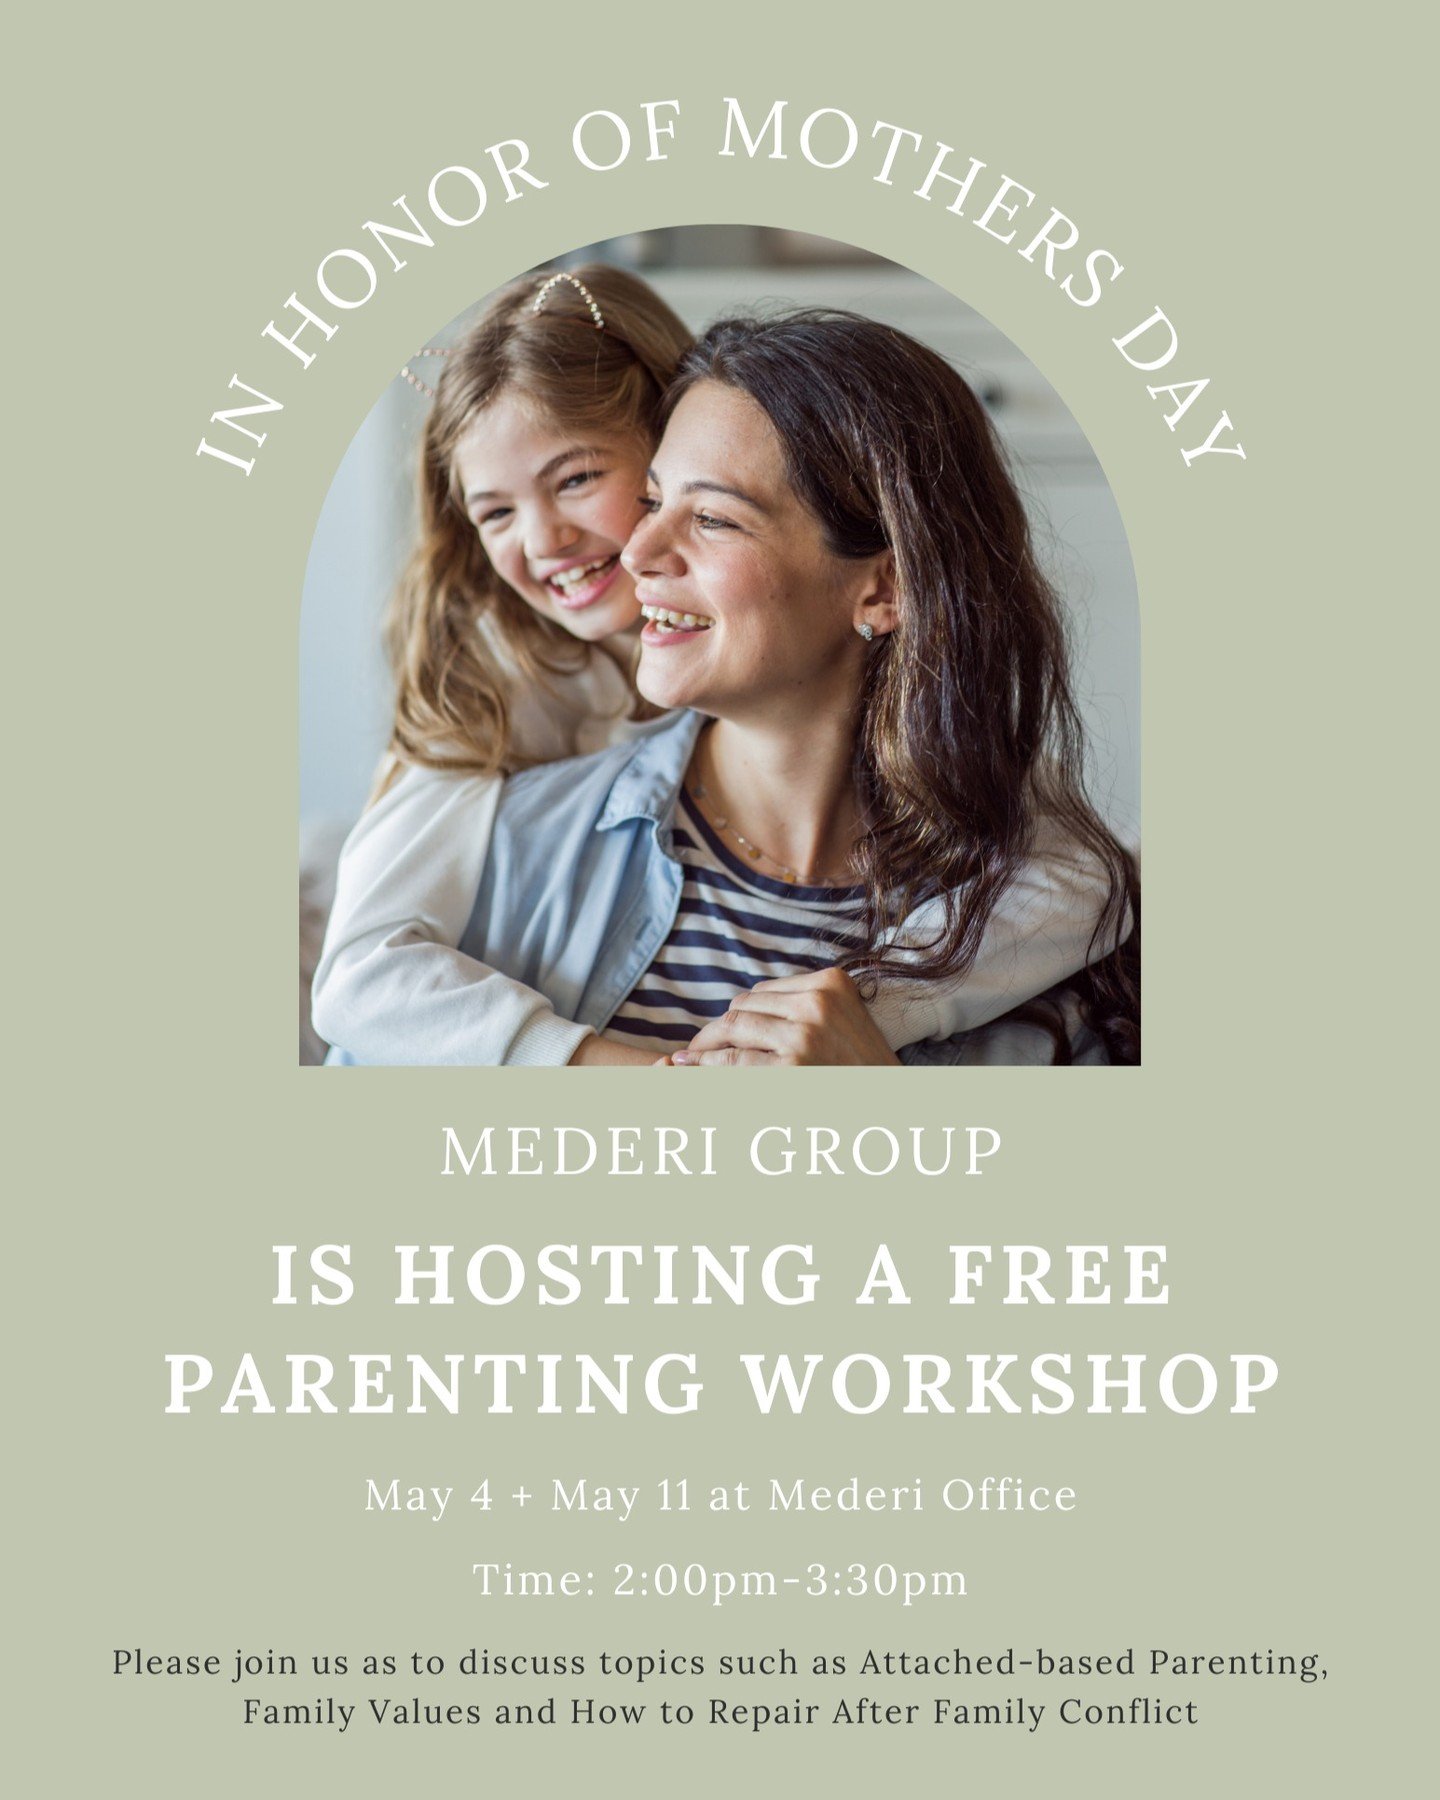 Join us for an afternoon of parenting insights and honest conversations at our FREE parenting workshop led by experts Reina Canute &amp; Clare Graff. Discover practical strategies, build strong connections, and cultivate harmony at home.

To reserve 